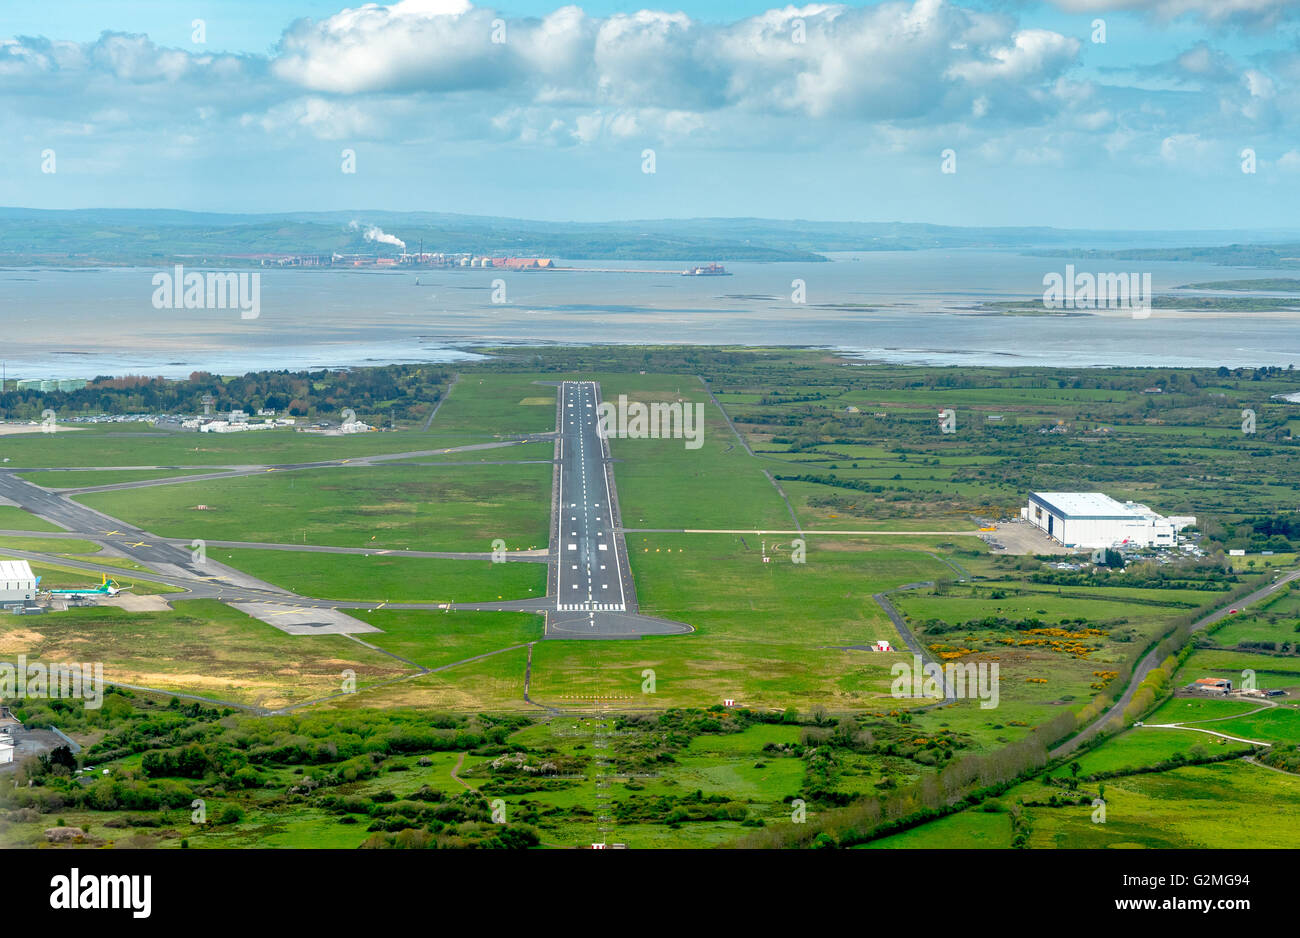 Aerial view, Shannon Airport, runway, Shannon, Ballycasey, COUNTY CLARE, Clare, Ireland, Europe airport, aerial, birds-eyes view Stock Photo